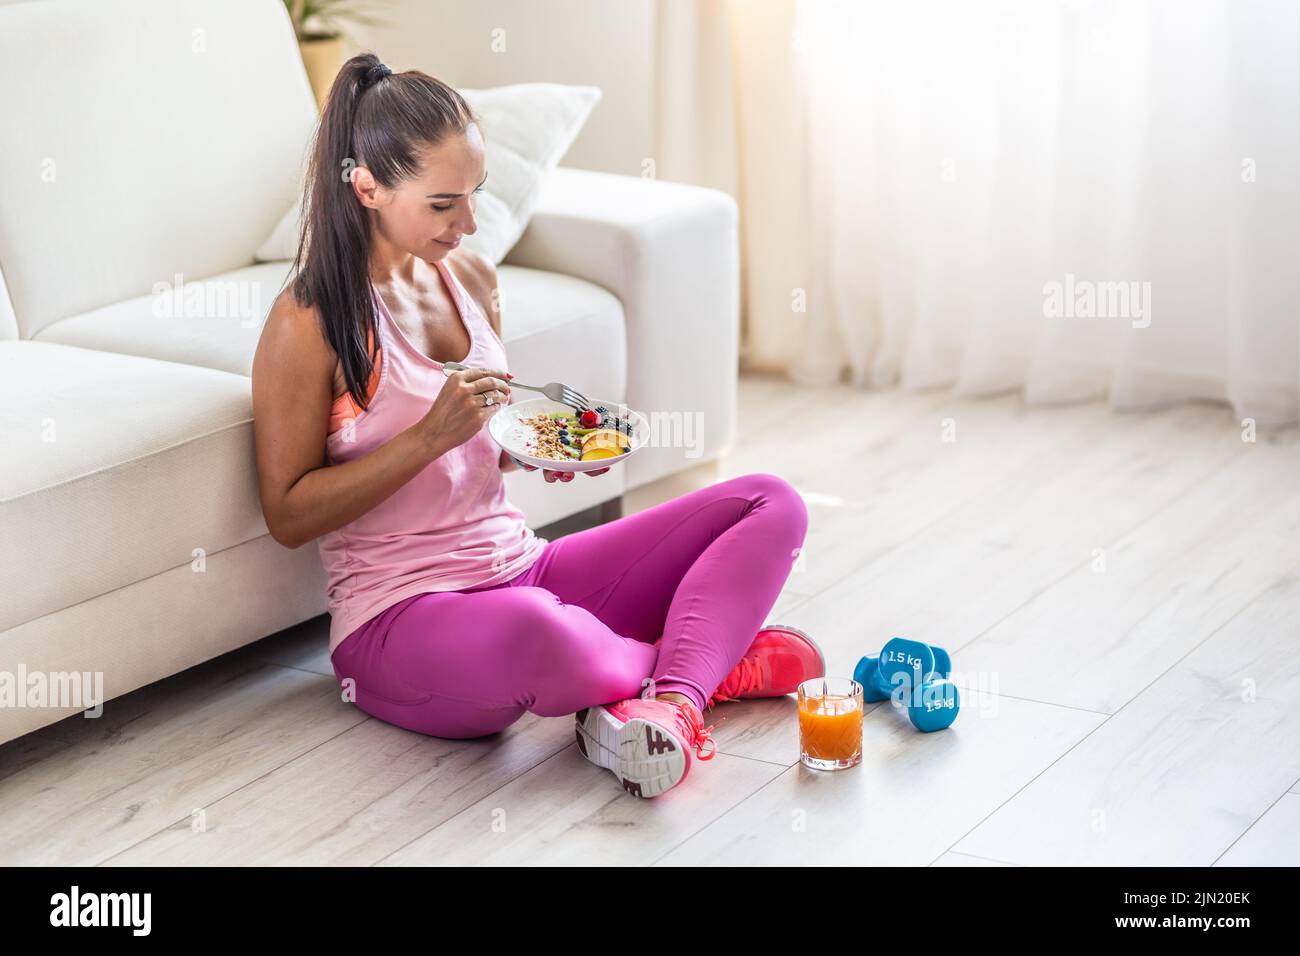 Sporty young woman eating a oatmeal with berries and fruits after a workout. Stock Photo